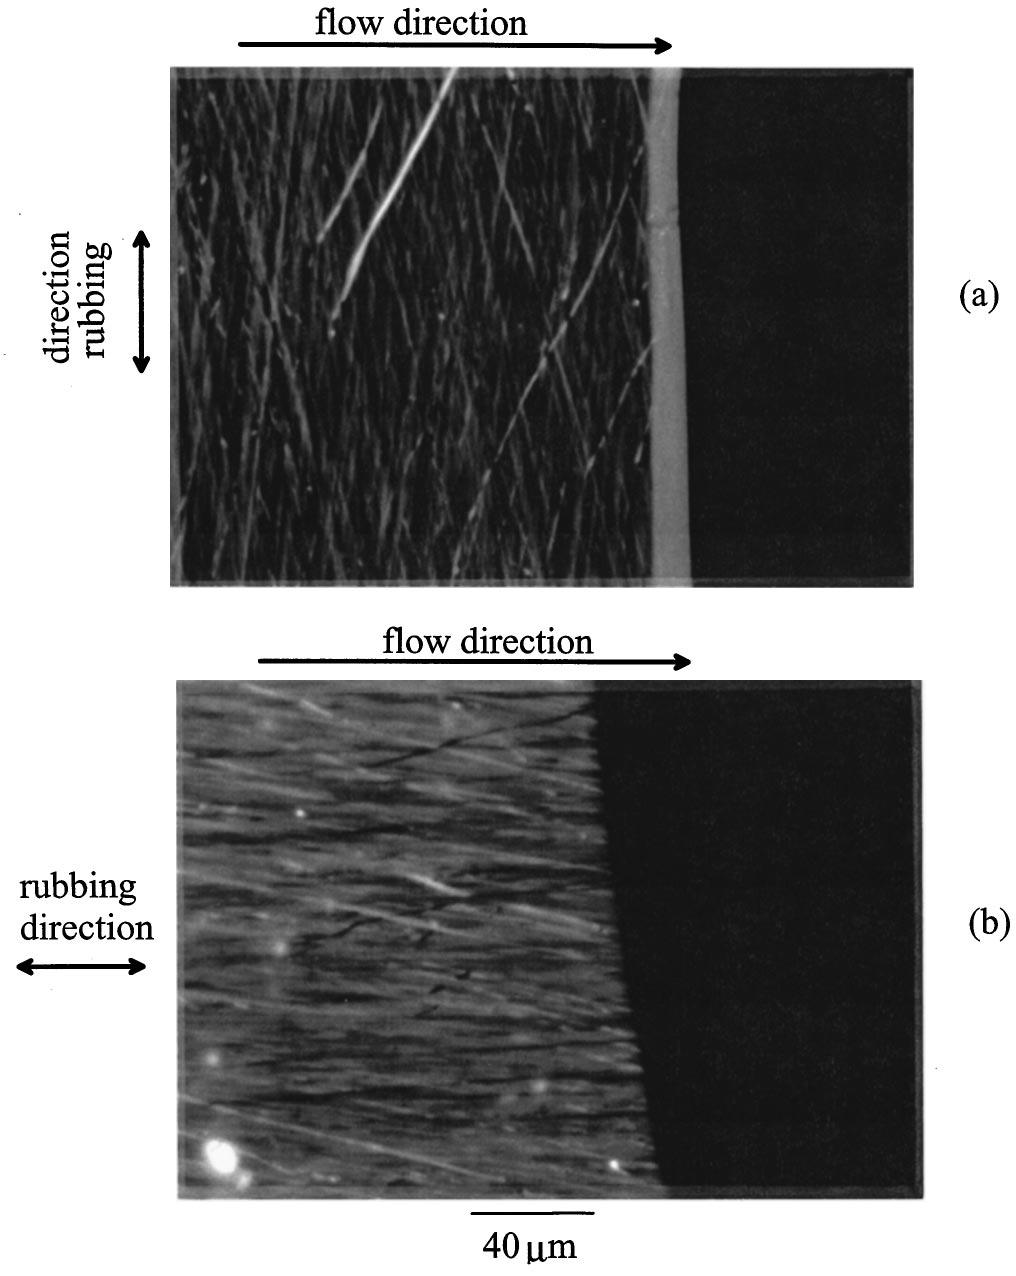 PRE 58 CAPILLARY FILLING OF NEMATIC LIQUID CRYSTALS 1999 FIG. 11. Liquid crystal director configuration in the flow front in cells with perpendicular rubbed polyimide.